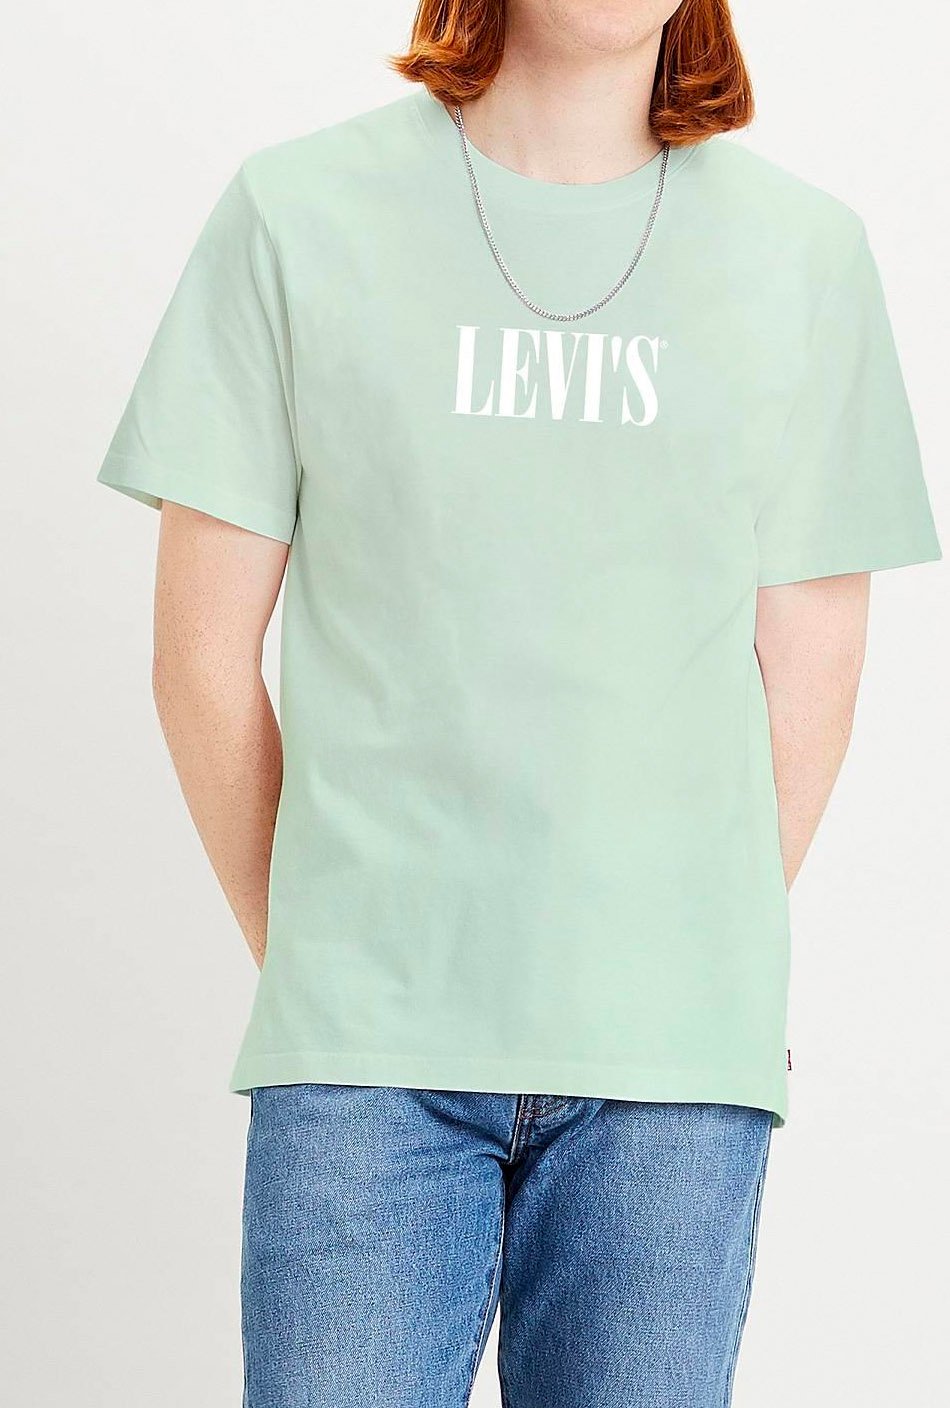 Levi's Relaxed Fit Seriff Puff t-shirt